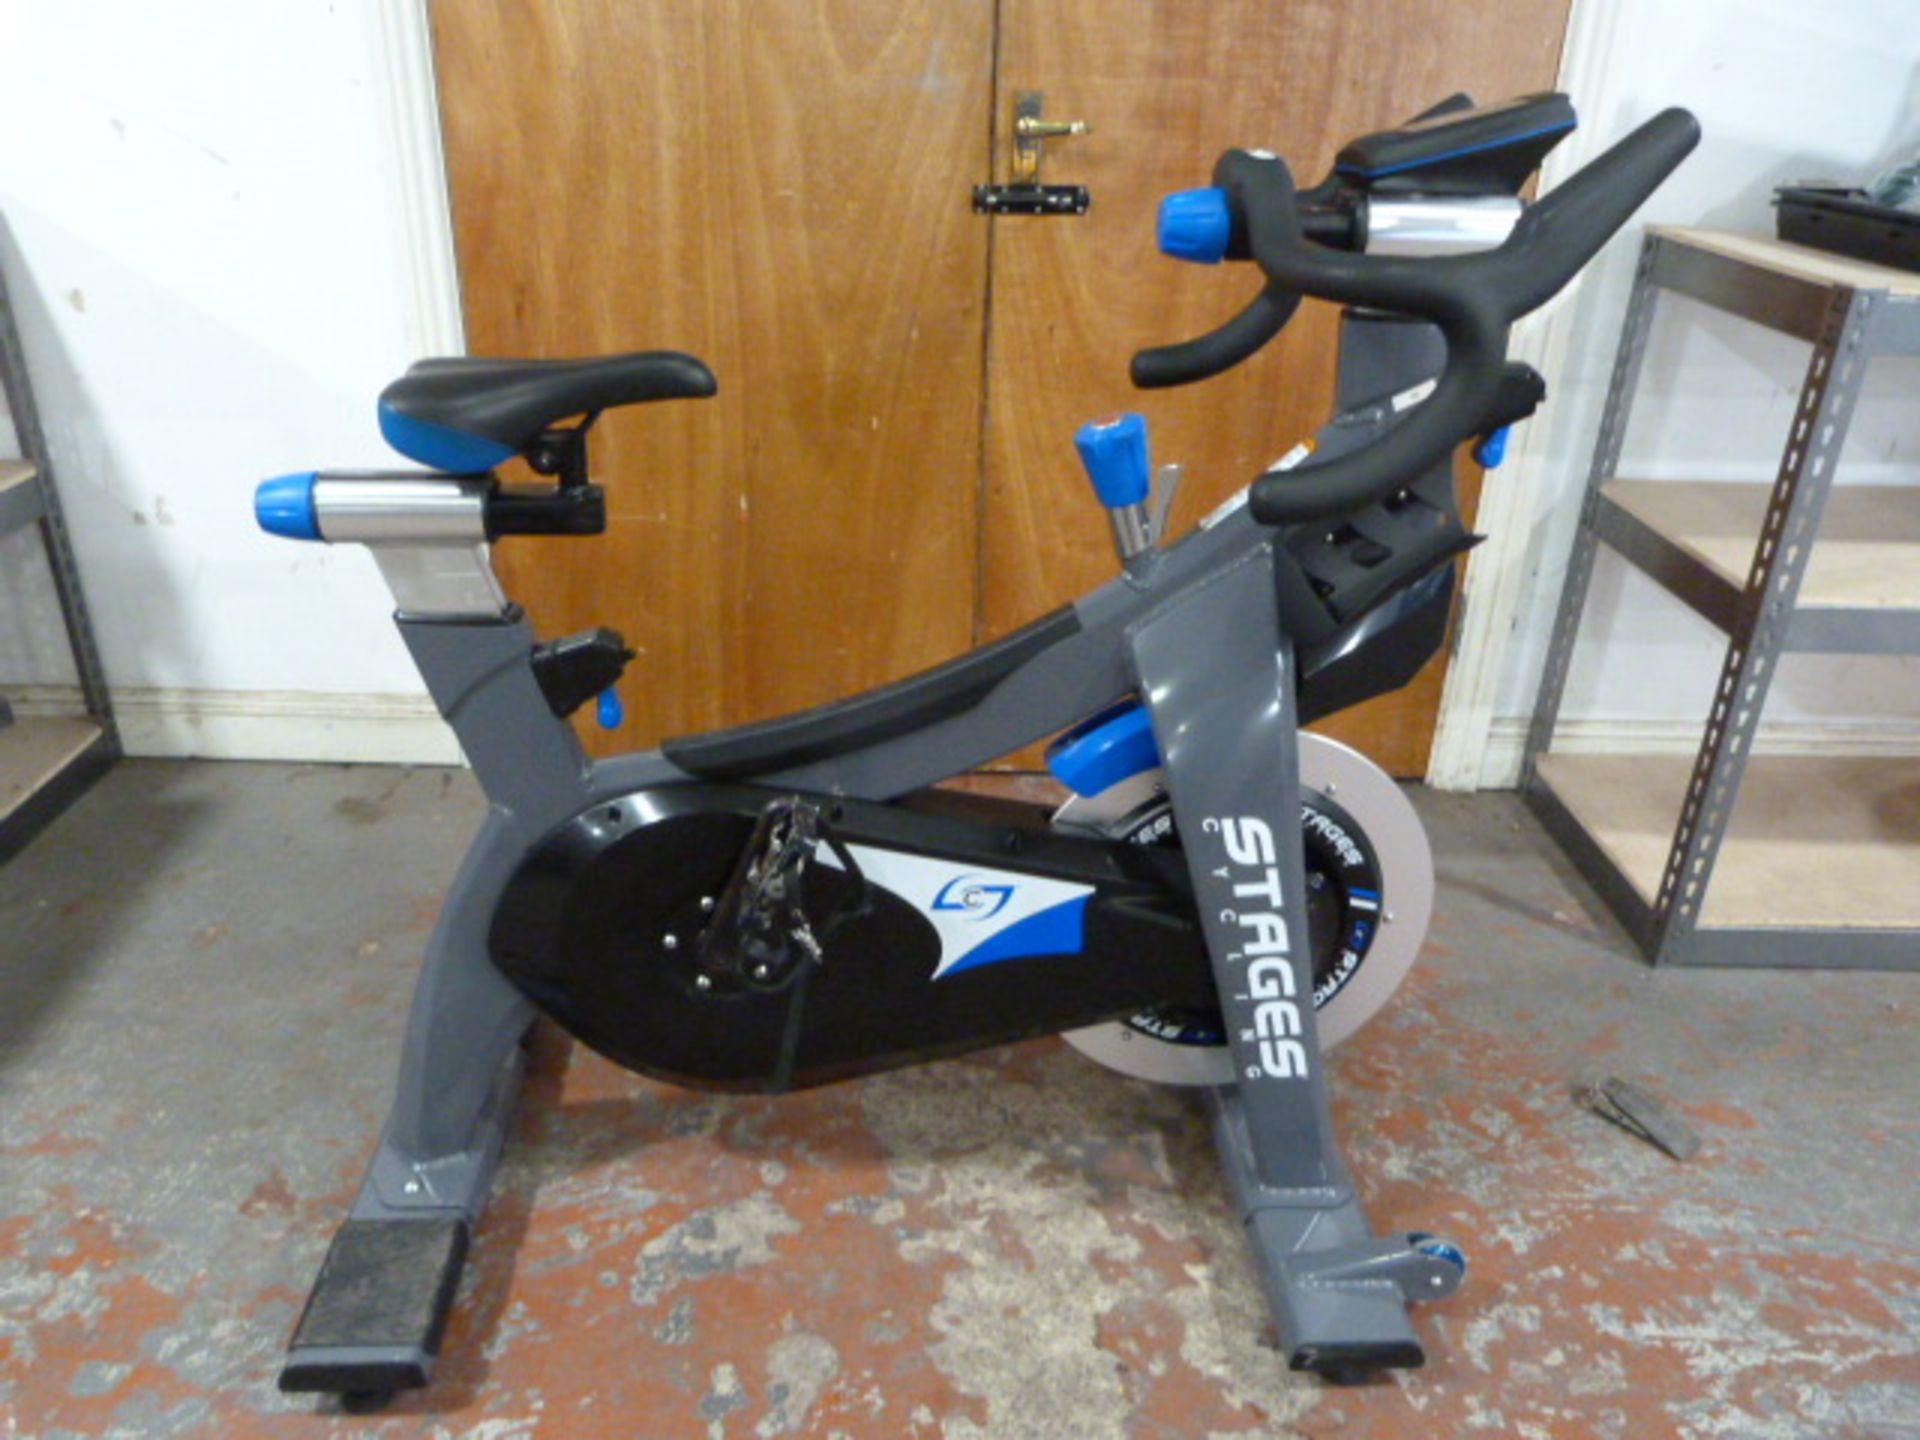 *Stages Cycling SC3 Exercise Bike